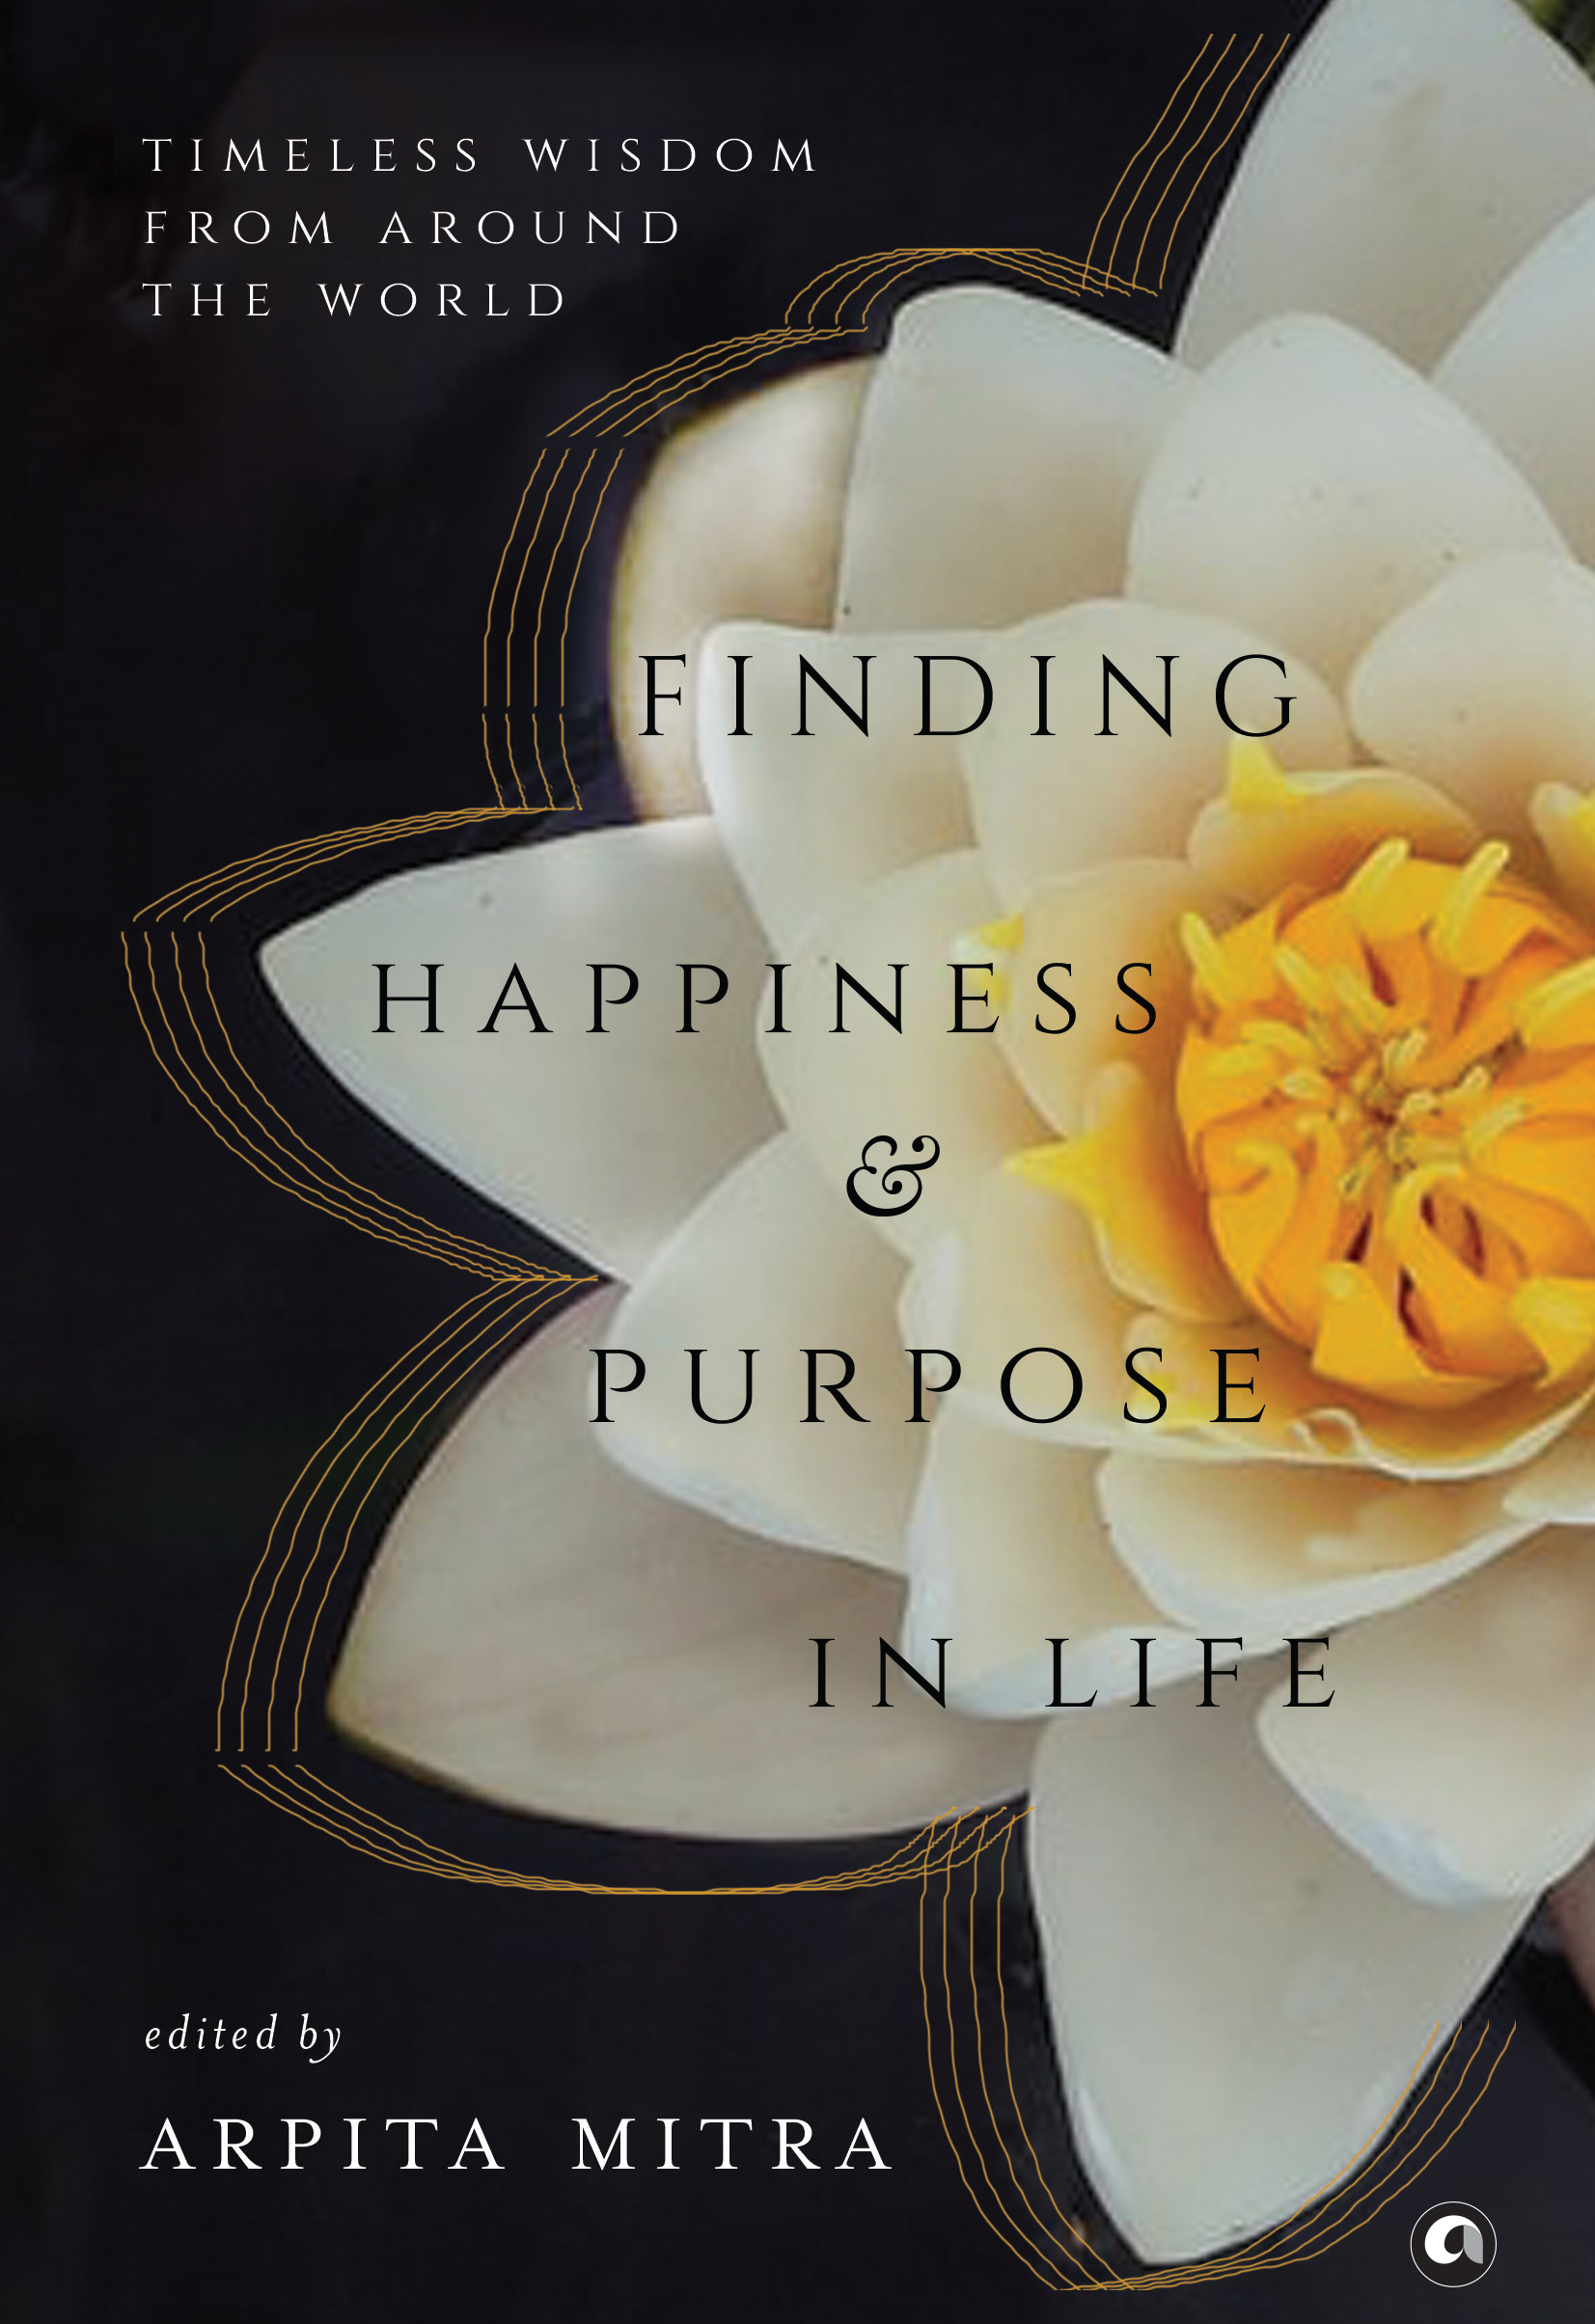 Finding Happiness and Purpose in Life: Timeless Wisdom from Around the World